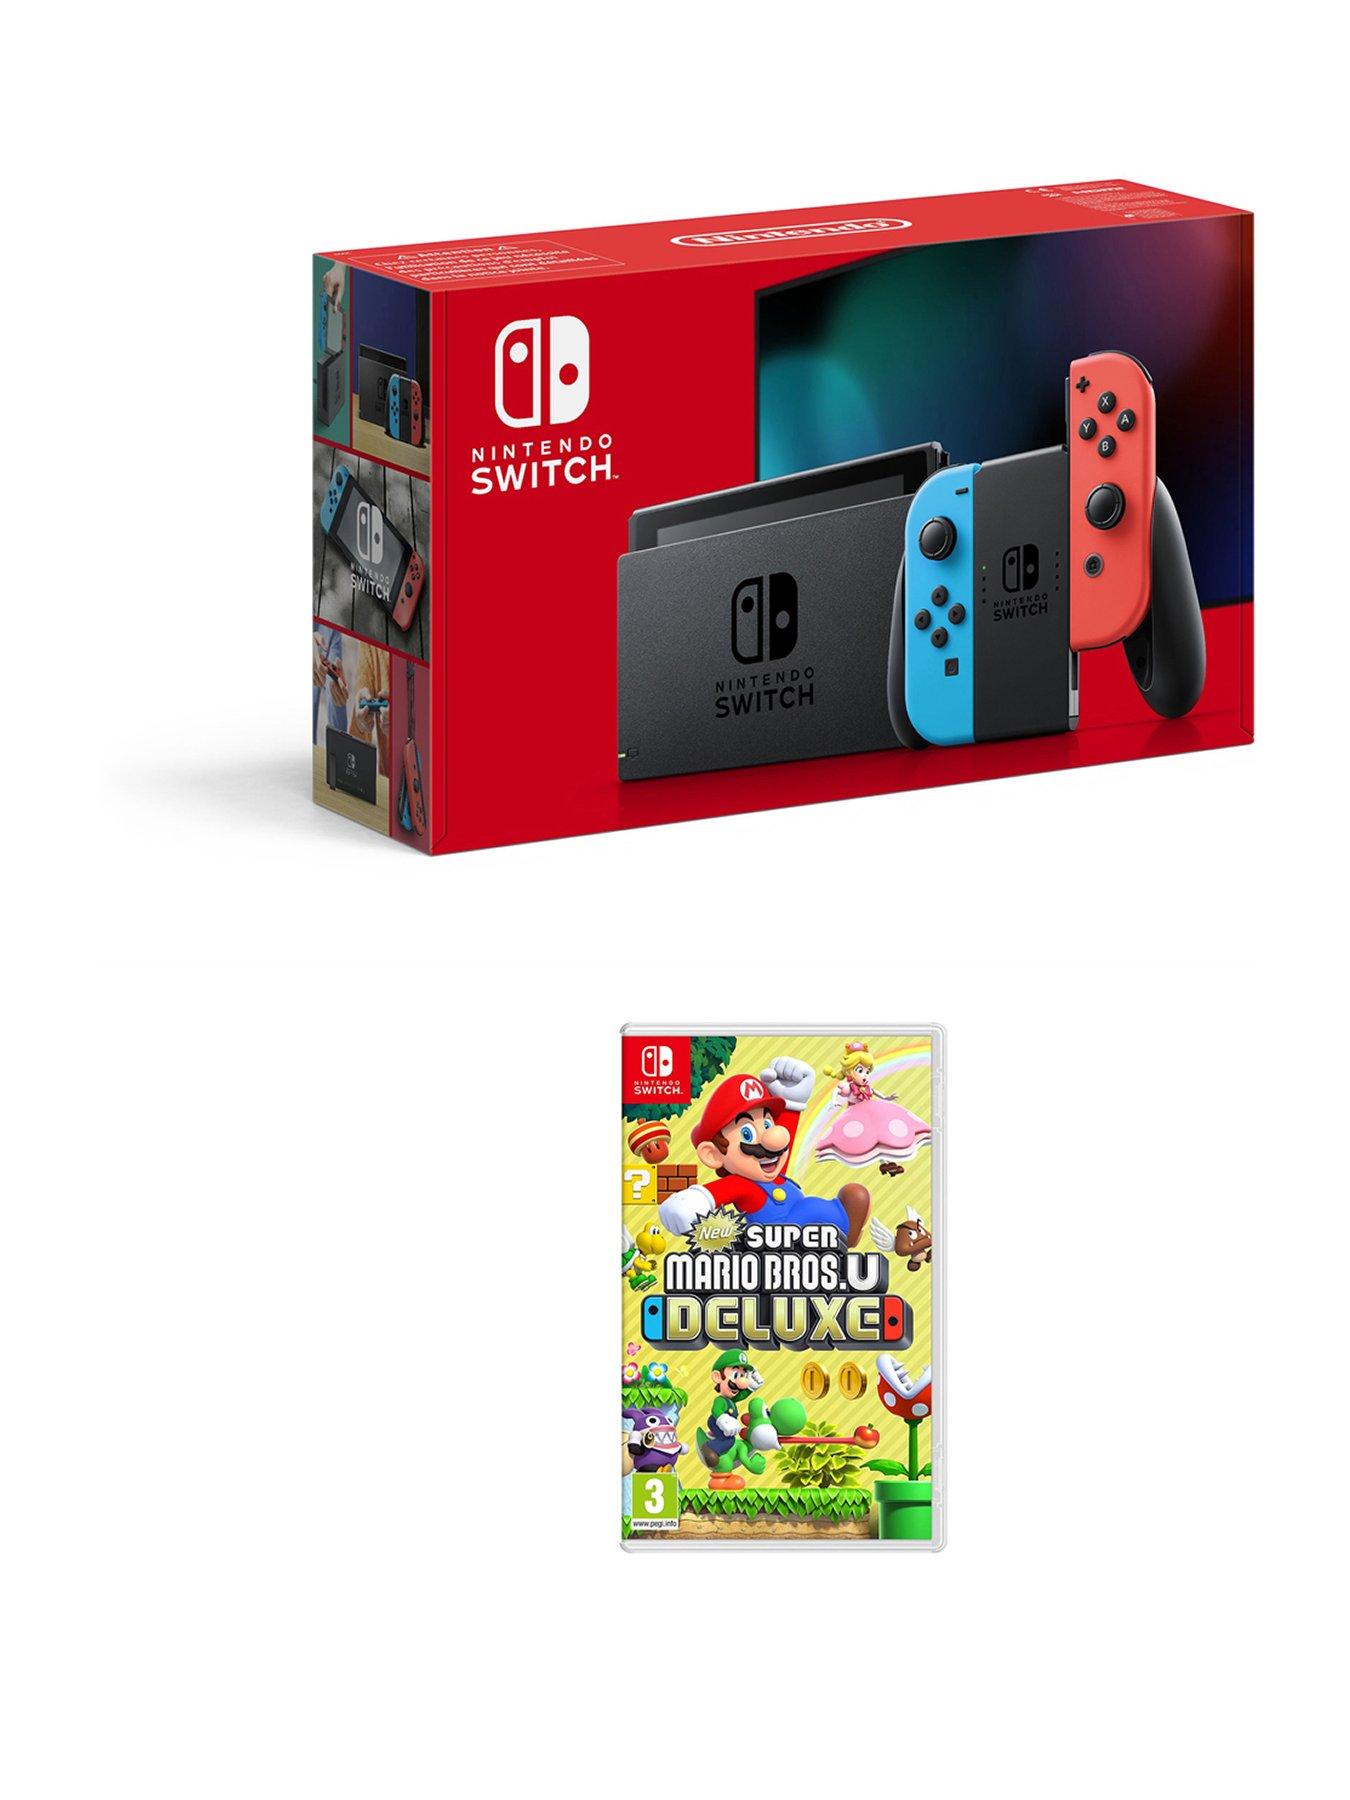 Nintendo Switch with Neon Blue and Neon Red Joy-Con + New Super Mario Bros.  U Deluxe (Full Game Download) - Switch Console